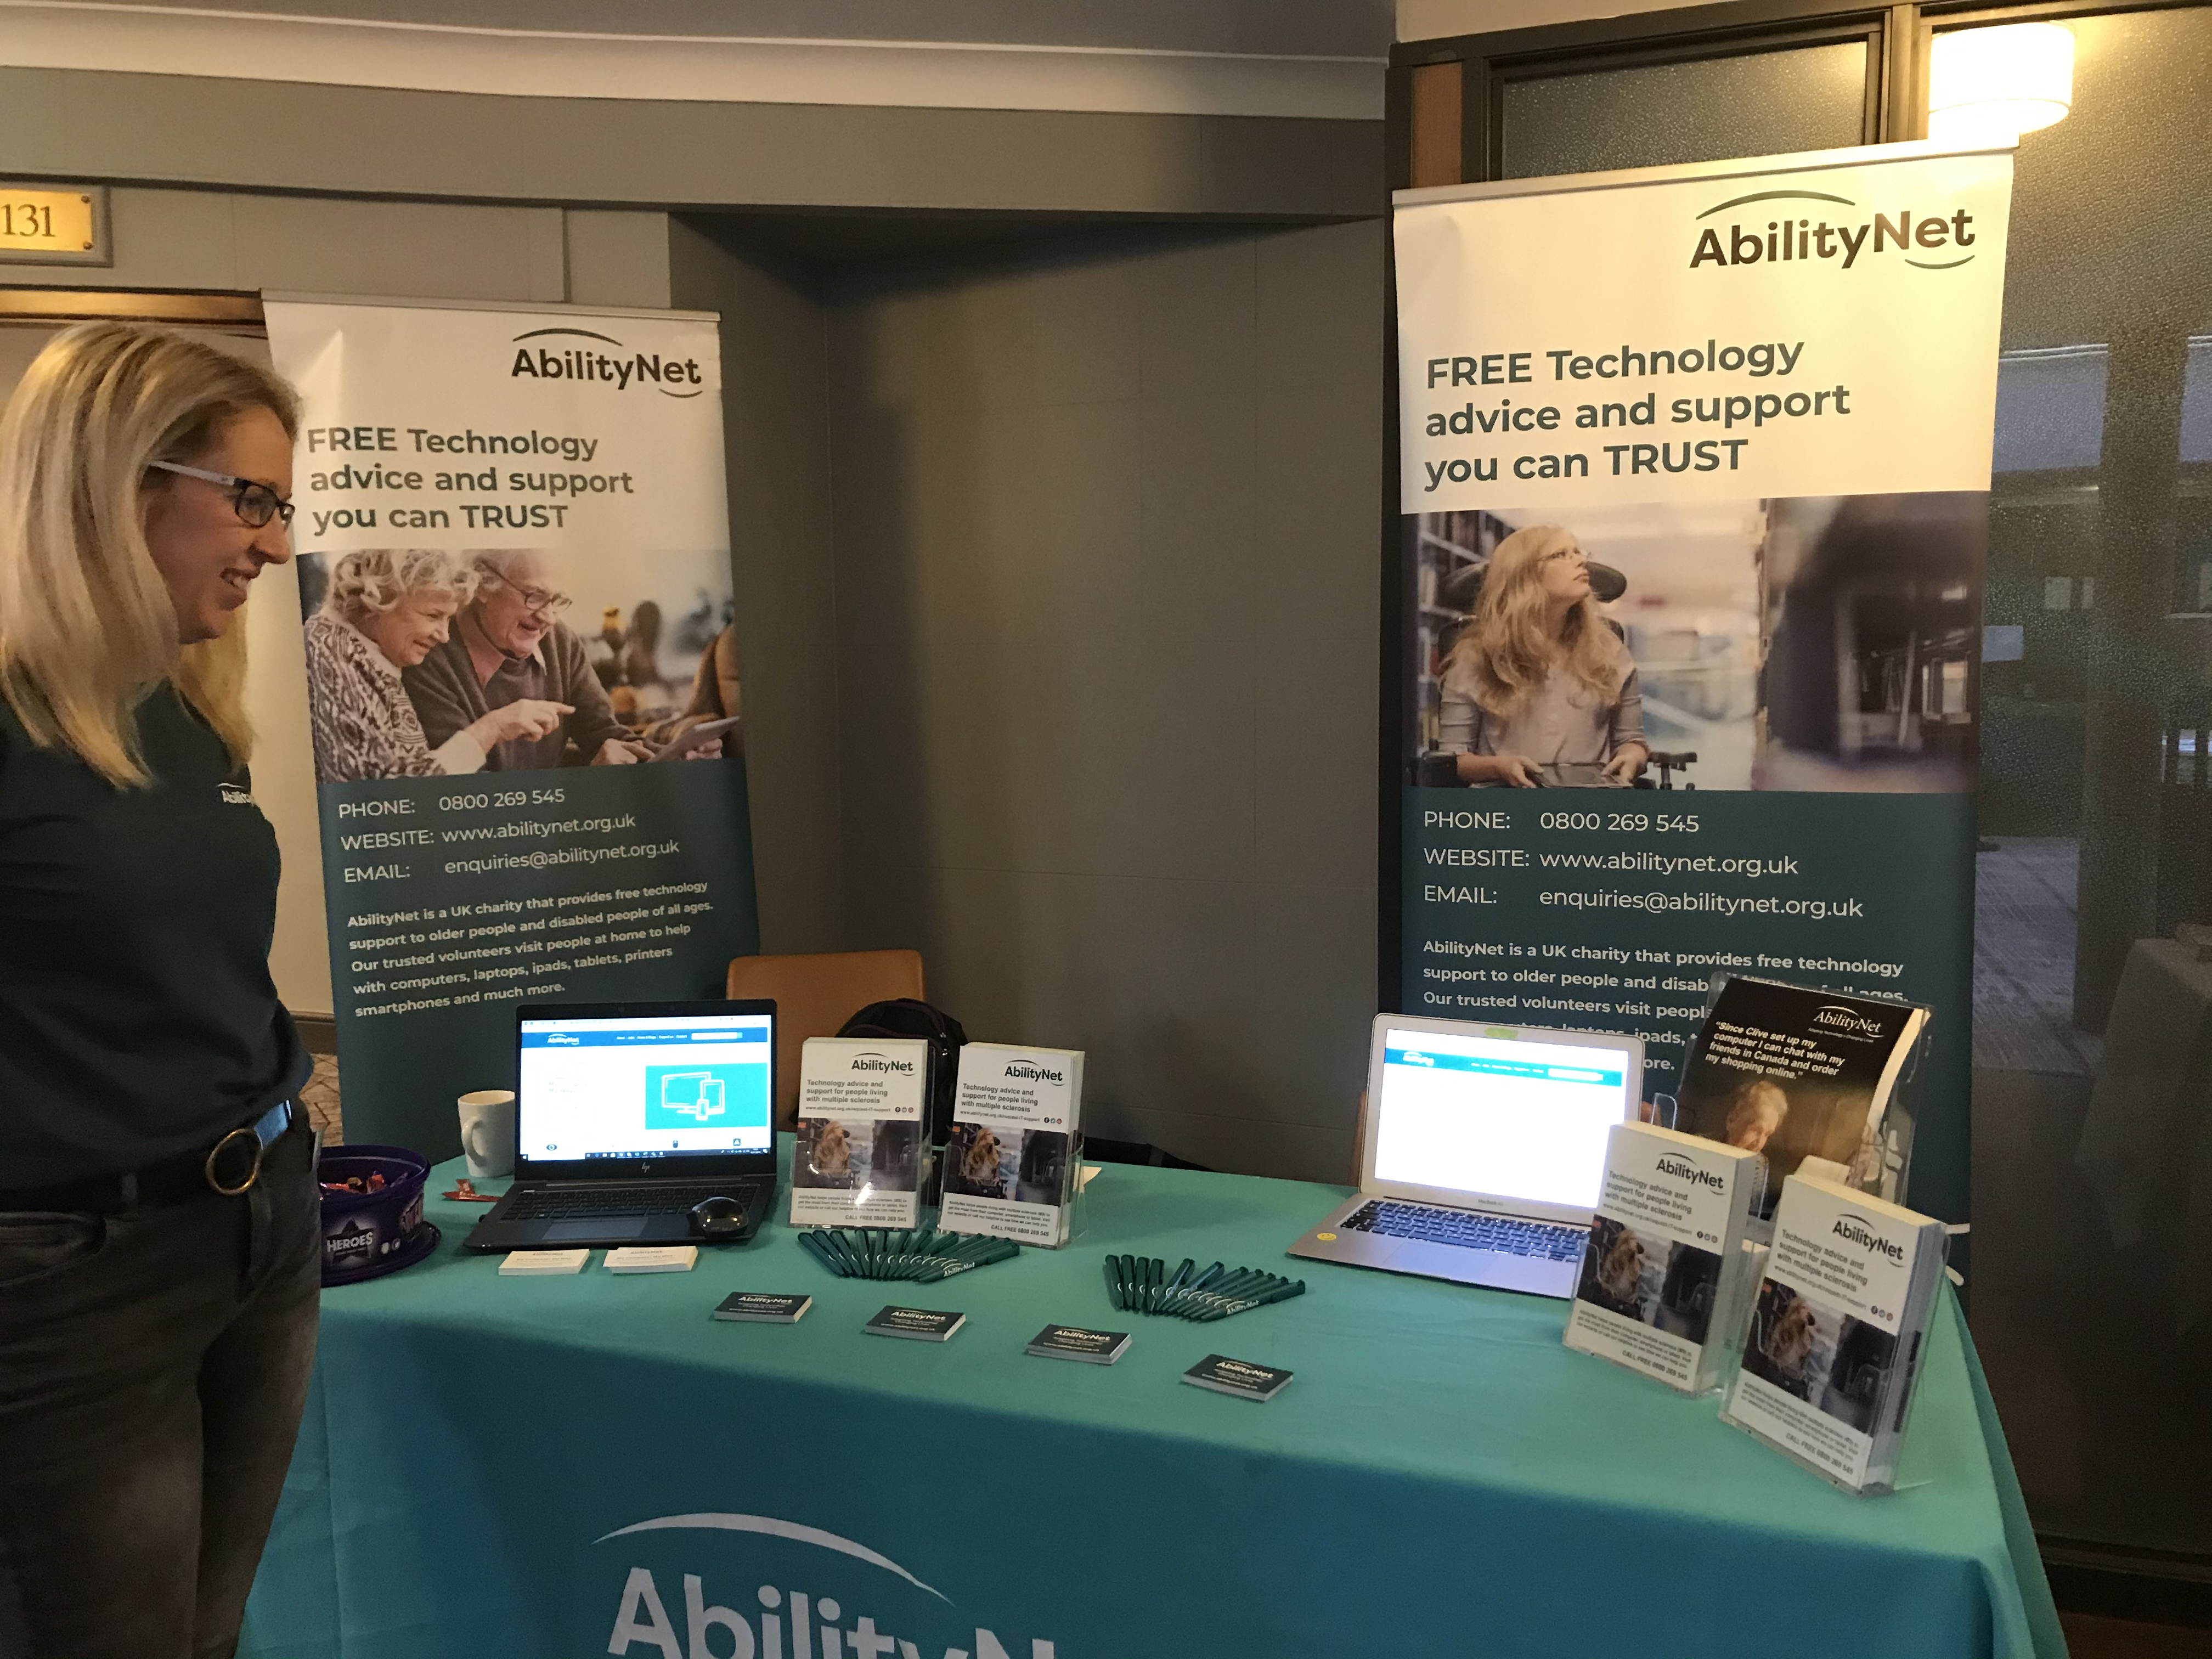 Free Services Manager Sarah Brain with the AbilityNet stand